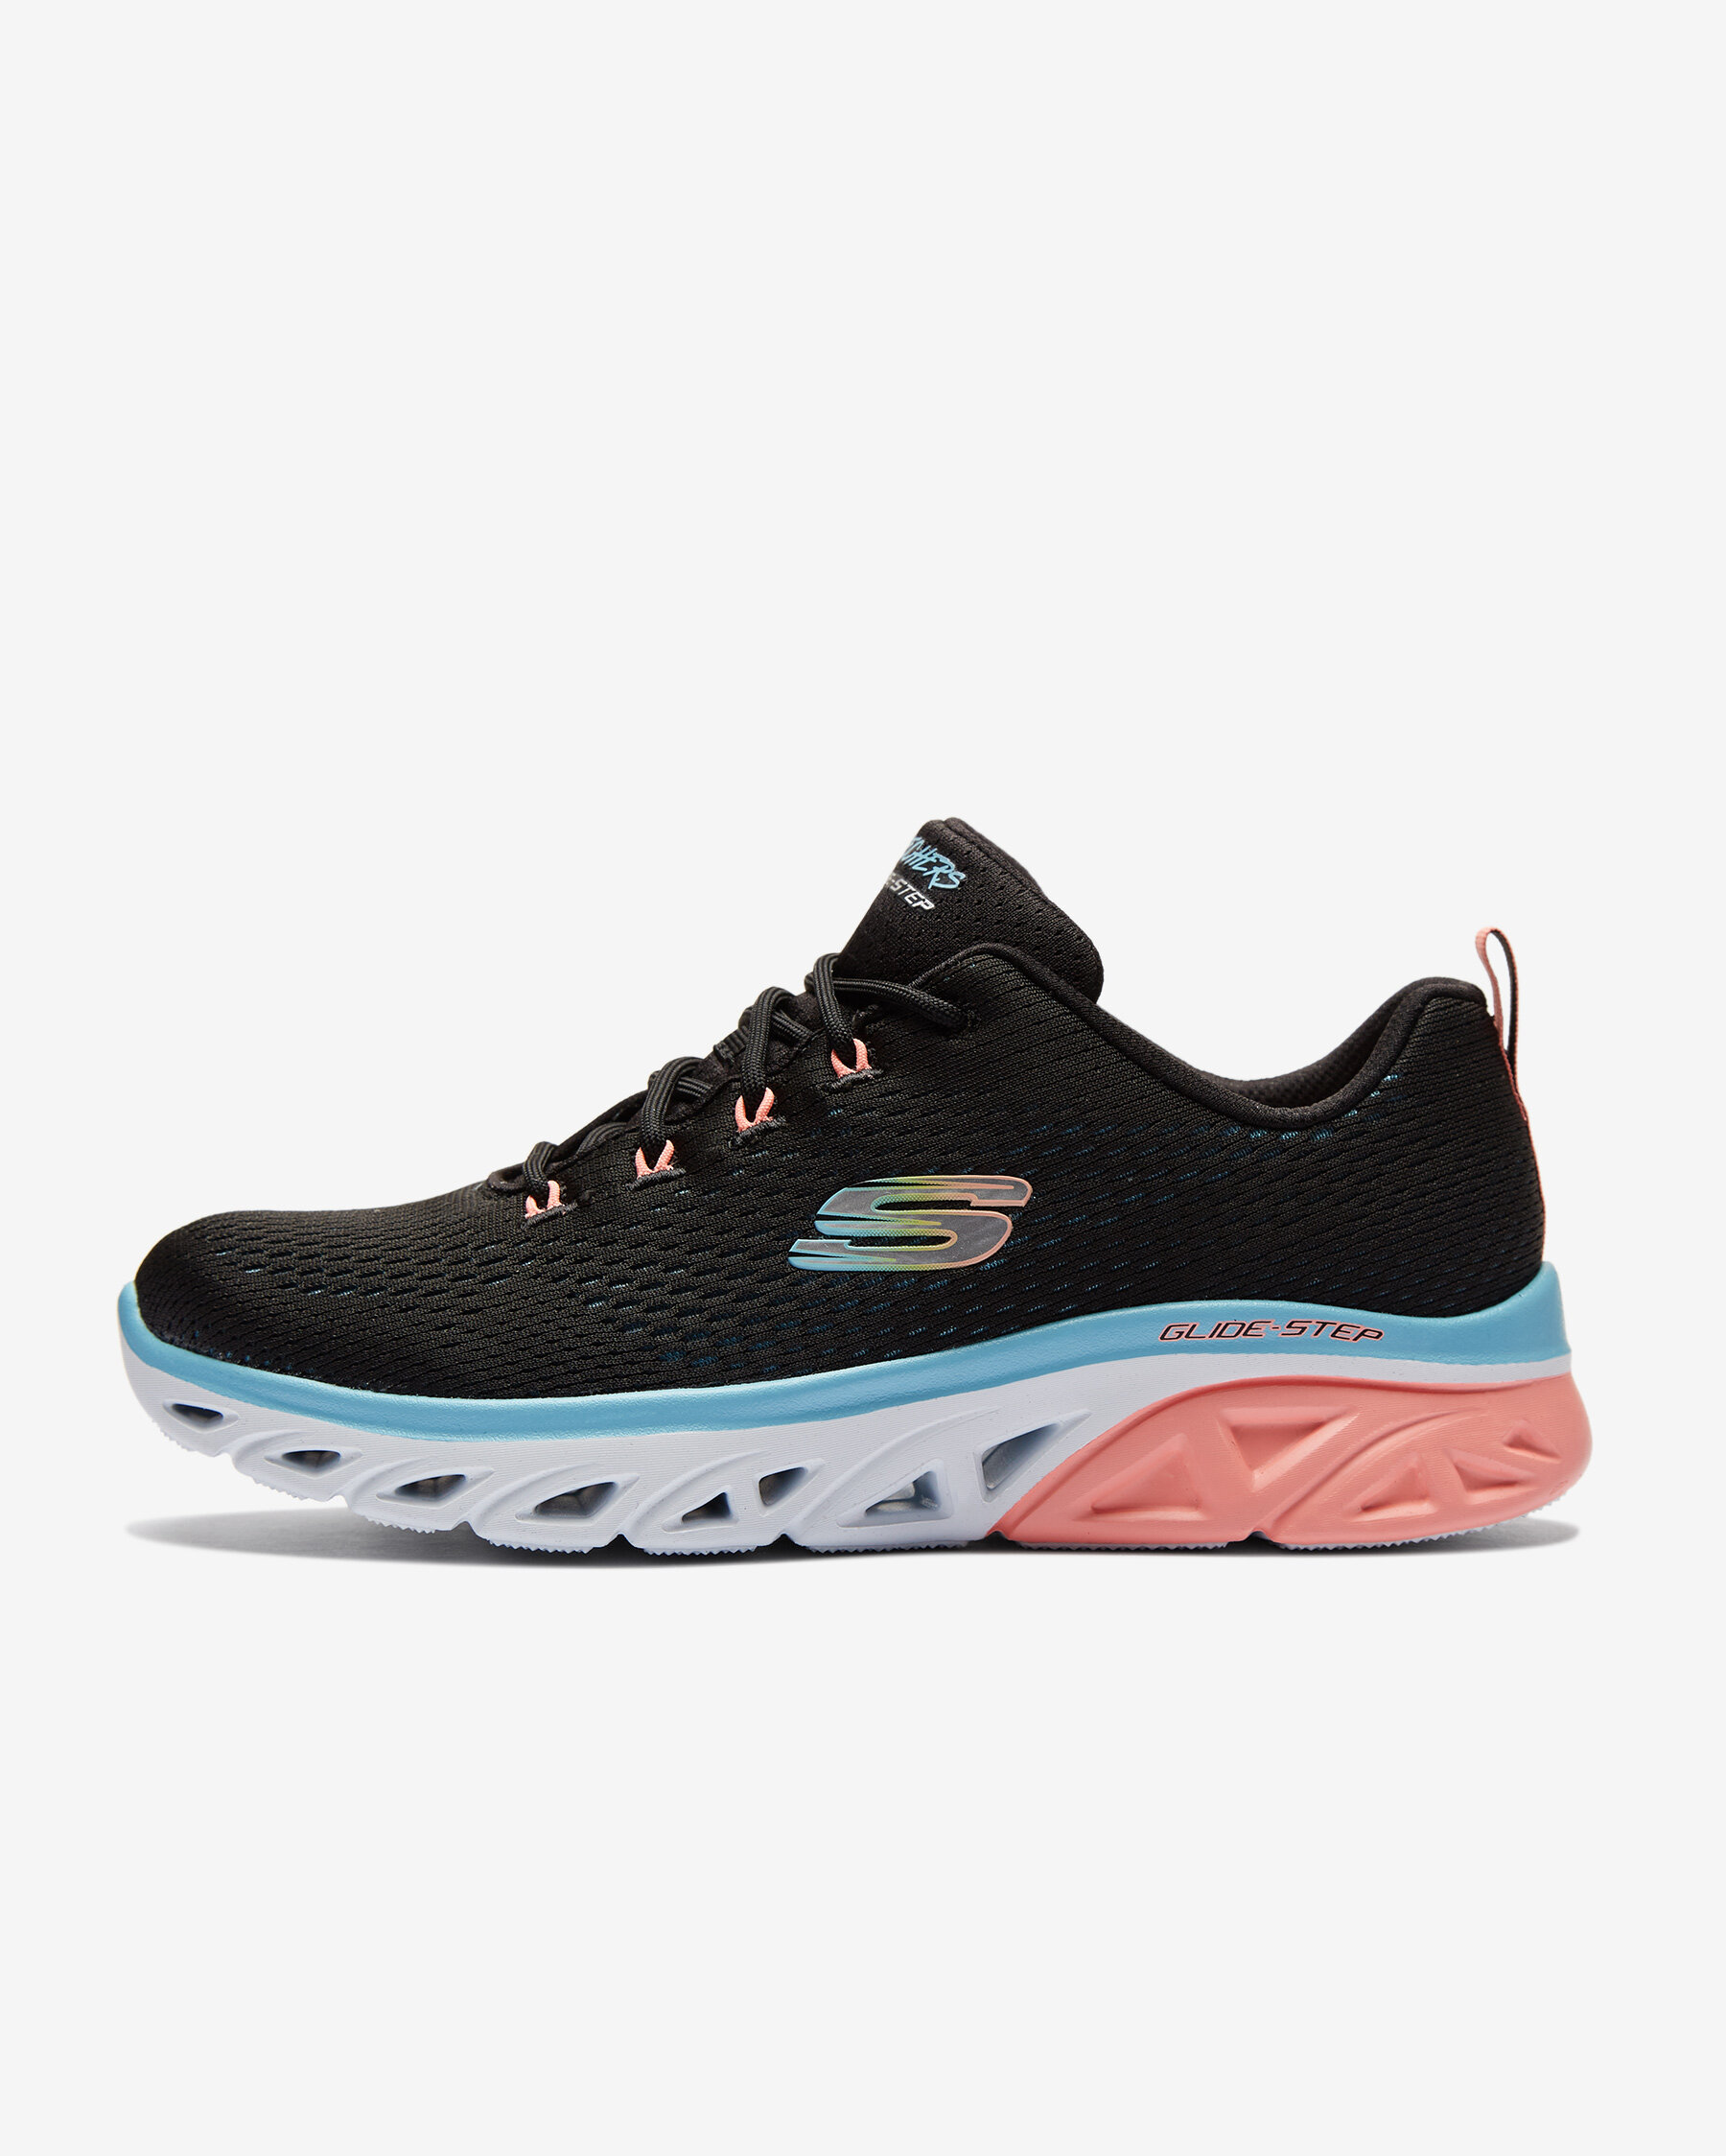 skechers air glide shoes